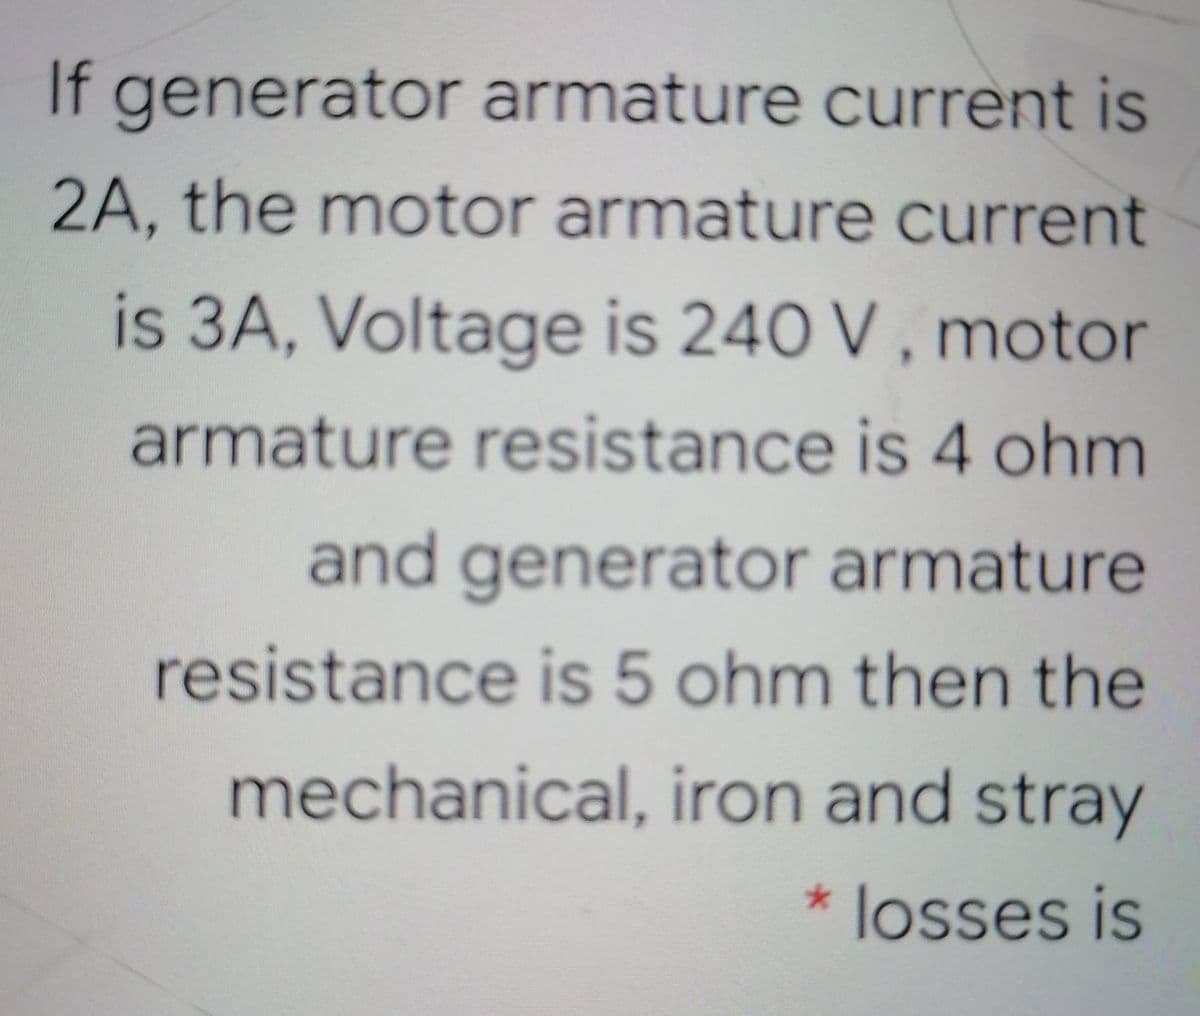 If generator armature current is
2A, the motor armature current
is 3A, Voltage is 240 V , motor
armature resistance is 4 ohm
and generator armature
resistance is 5 ohm then the
mechanical, iron and stray
*losses is
